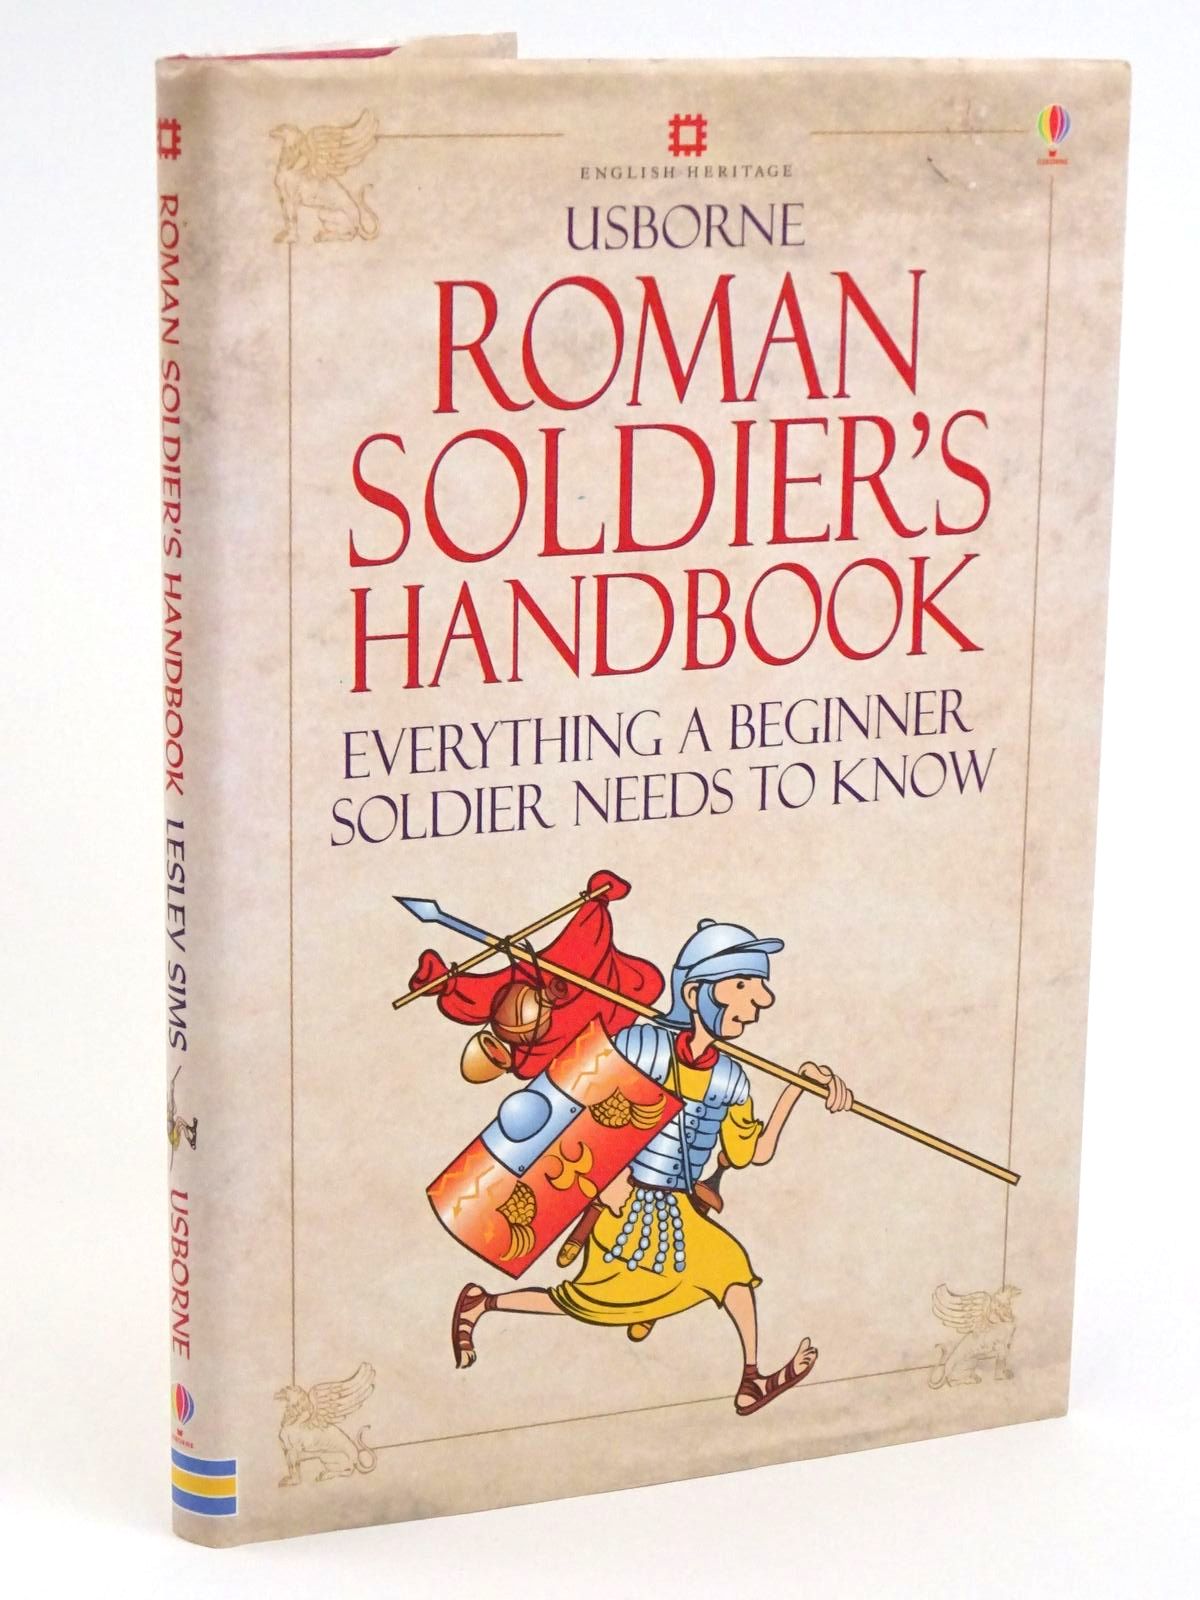 Photo of THE ROMAN SOLDIER'S HANDBOOK written by Sims, Lesley illustrated by McNee, Ian published by Usborne Publishing Ltd. (STOCK CODE: 1318071)  for sale by Stella & Rose's Books